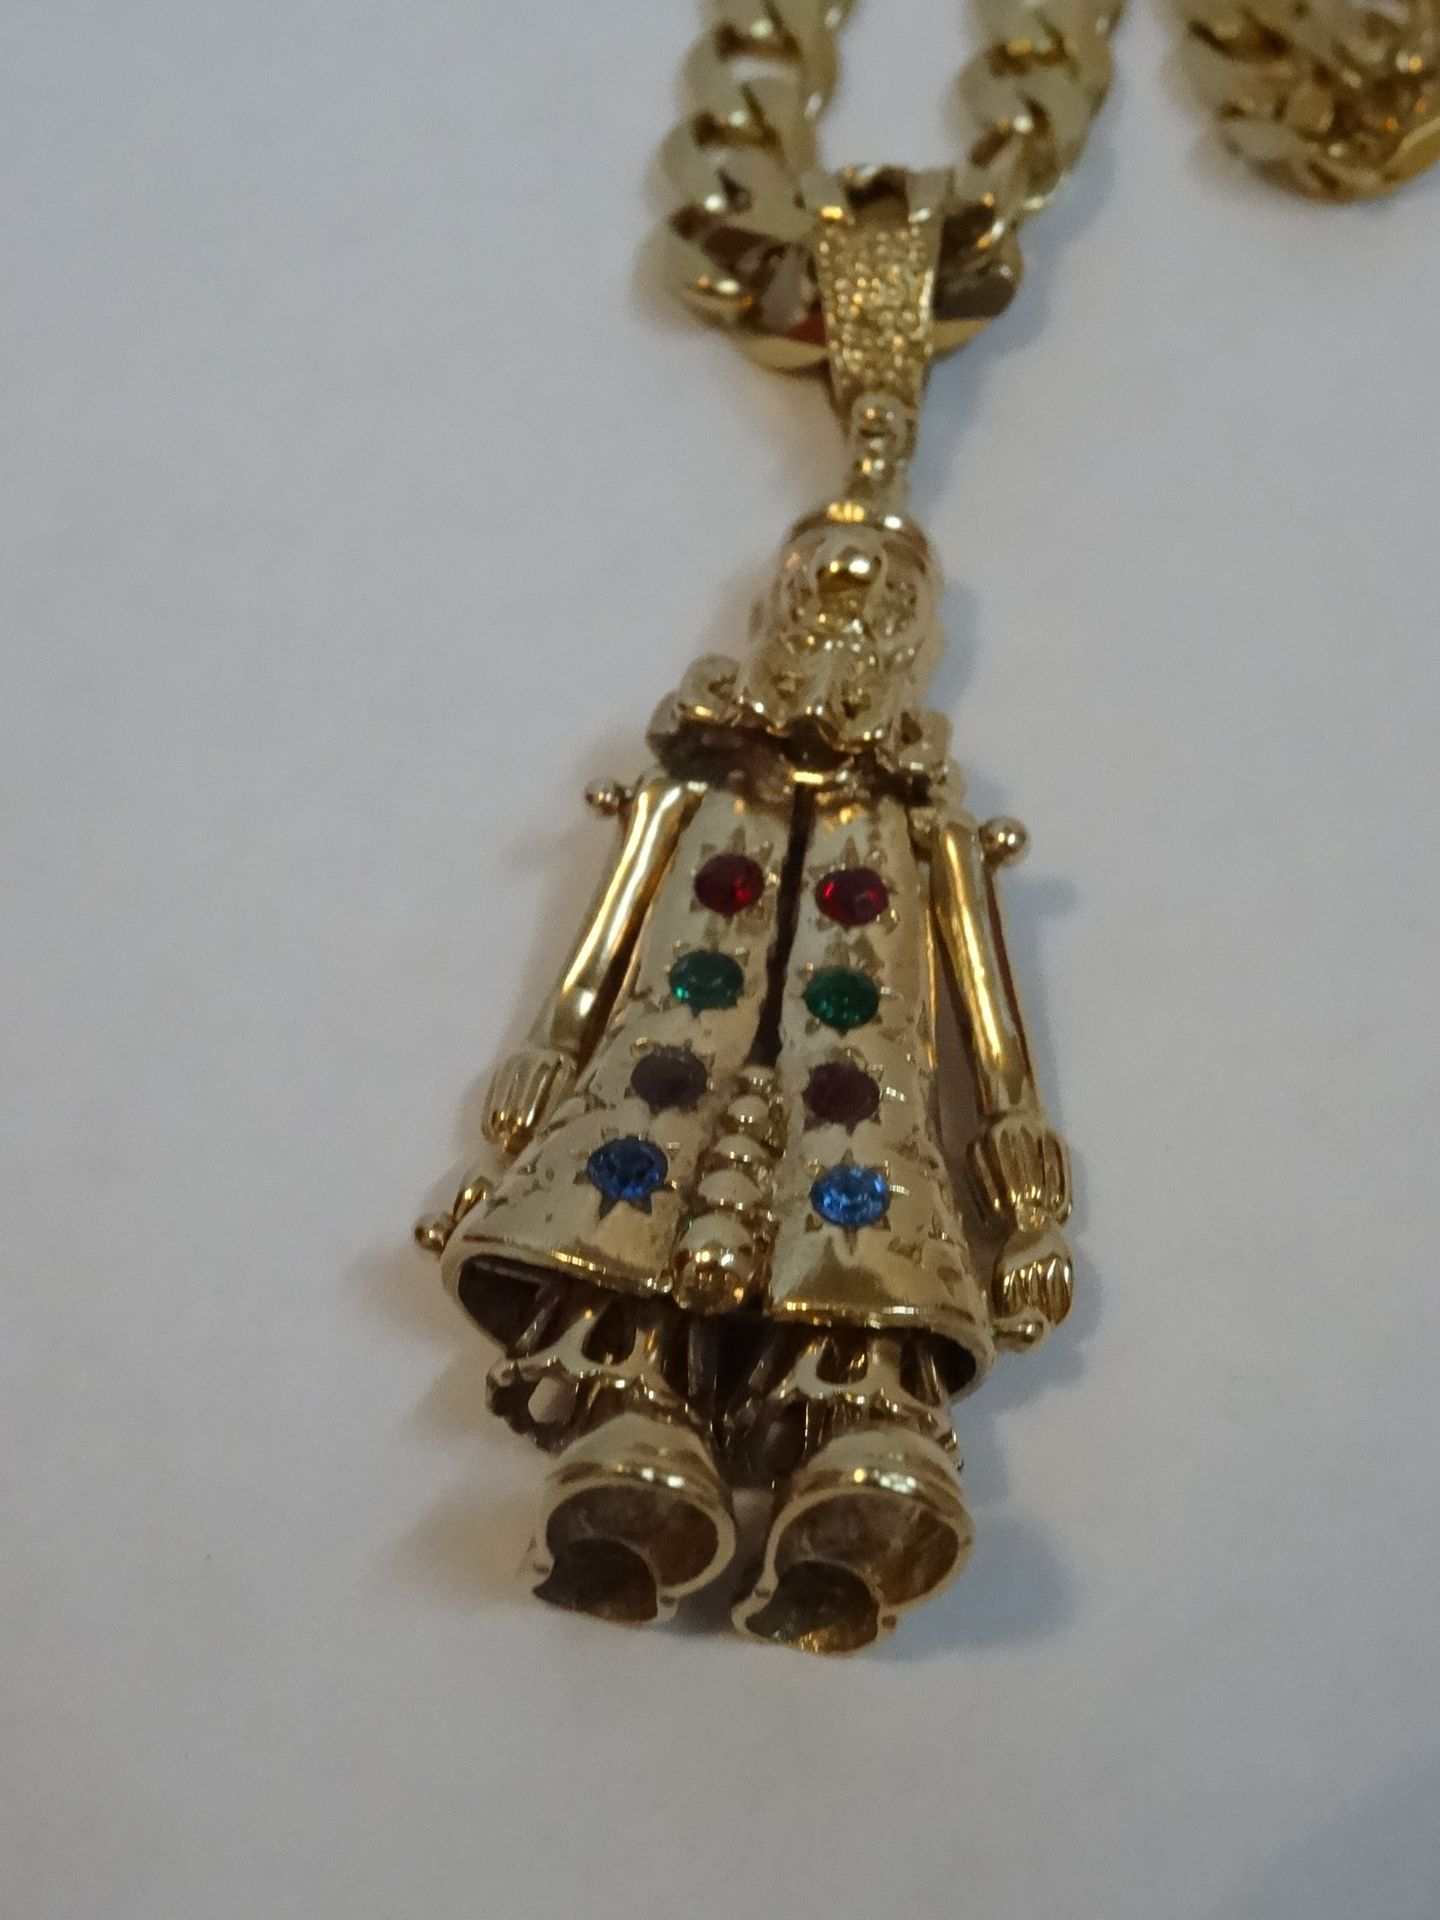 9 Carat Yellow Gold Curb Chain & Moveable Clown Pendant. - Image 2 of 6